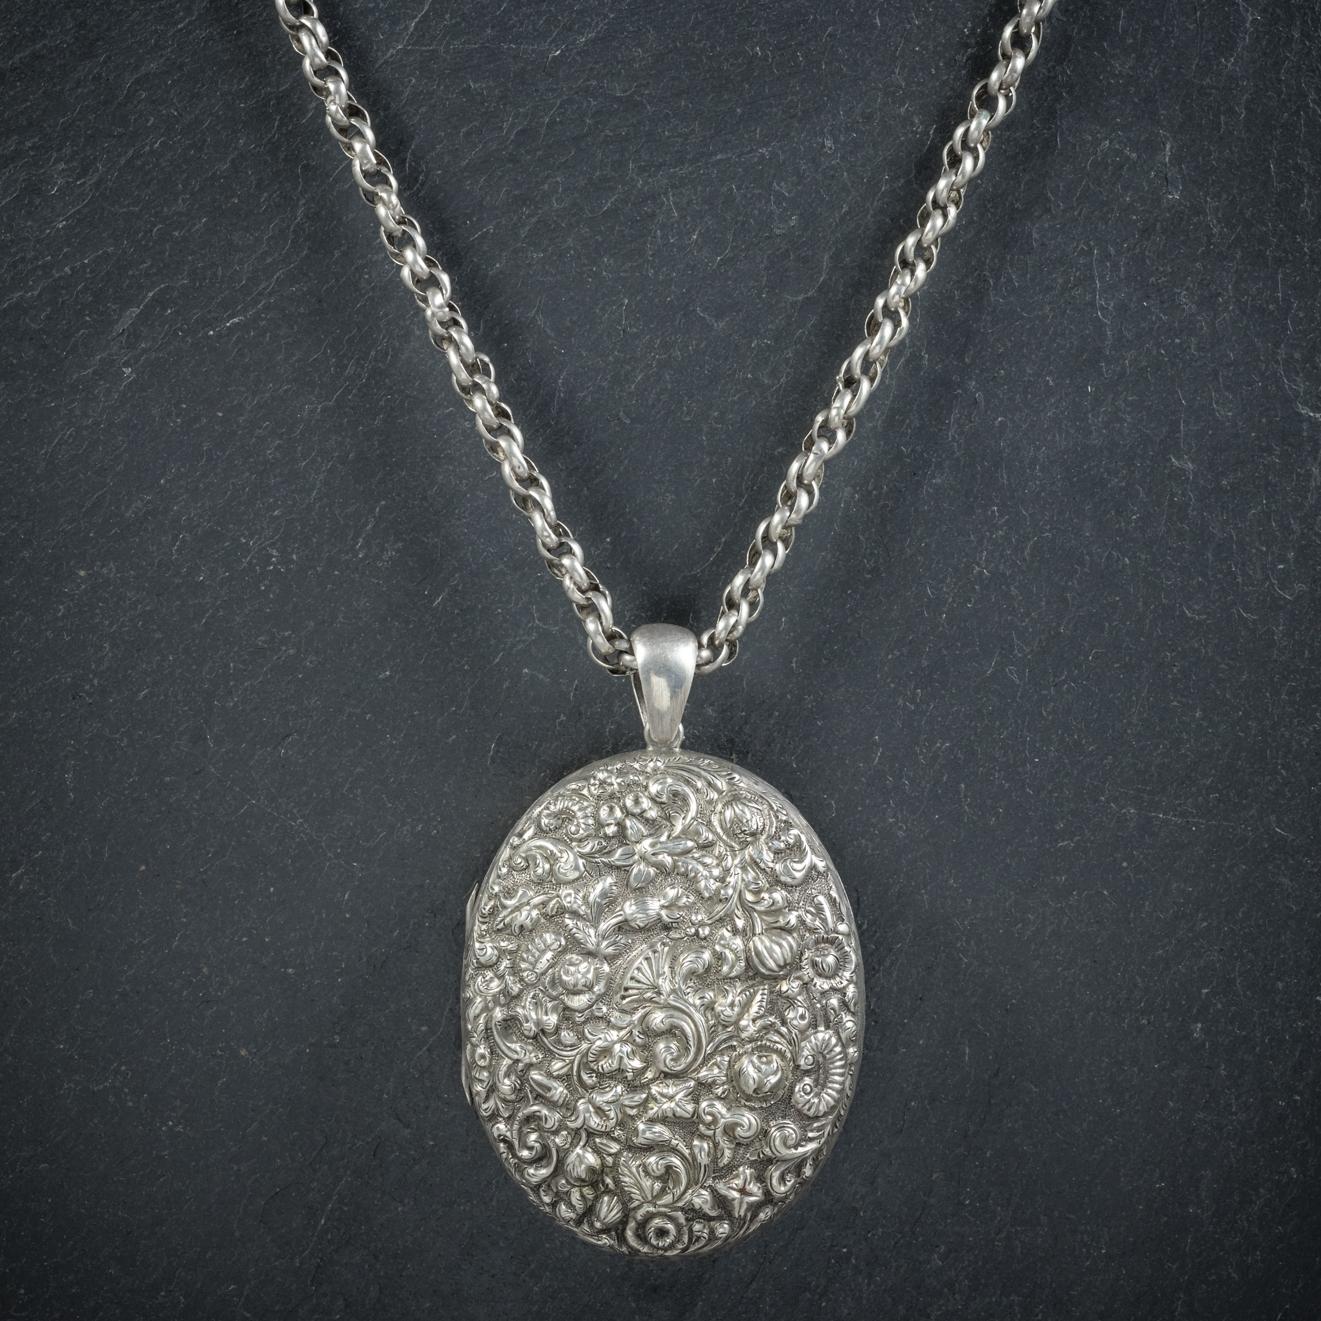 A fancy antique Silver floral Locket and chain from the Victorian era, Circa 1900. 

The large Silver locket displays beautiful embossed workmanship depicting detailed floral motifs across the front and back. 

Complete with a Silver link chain